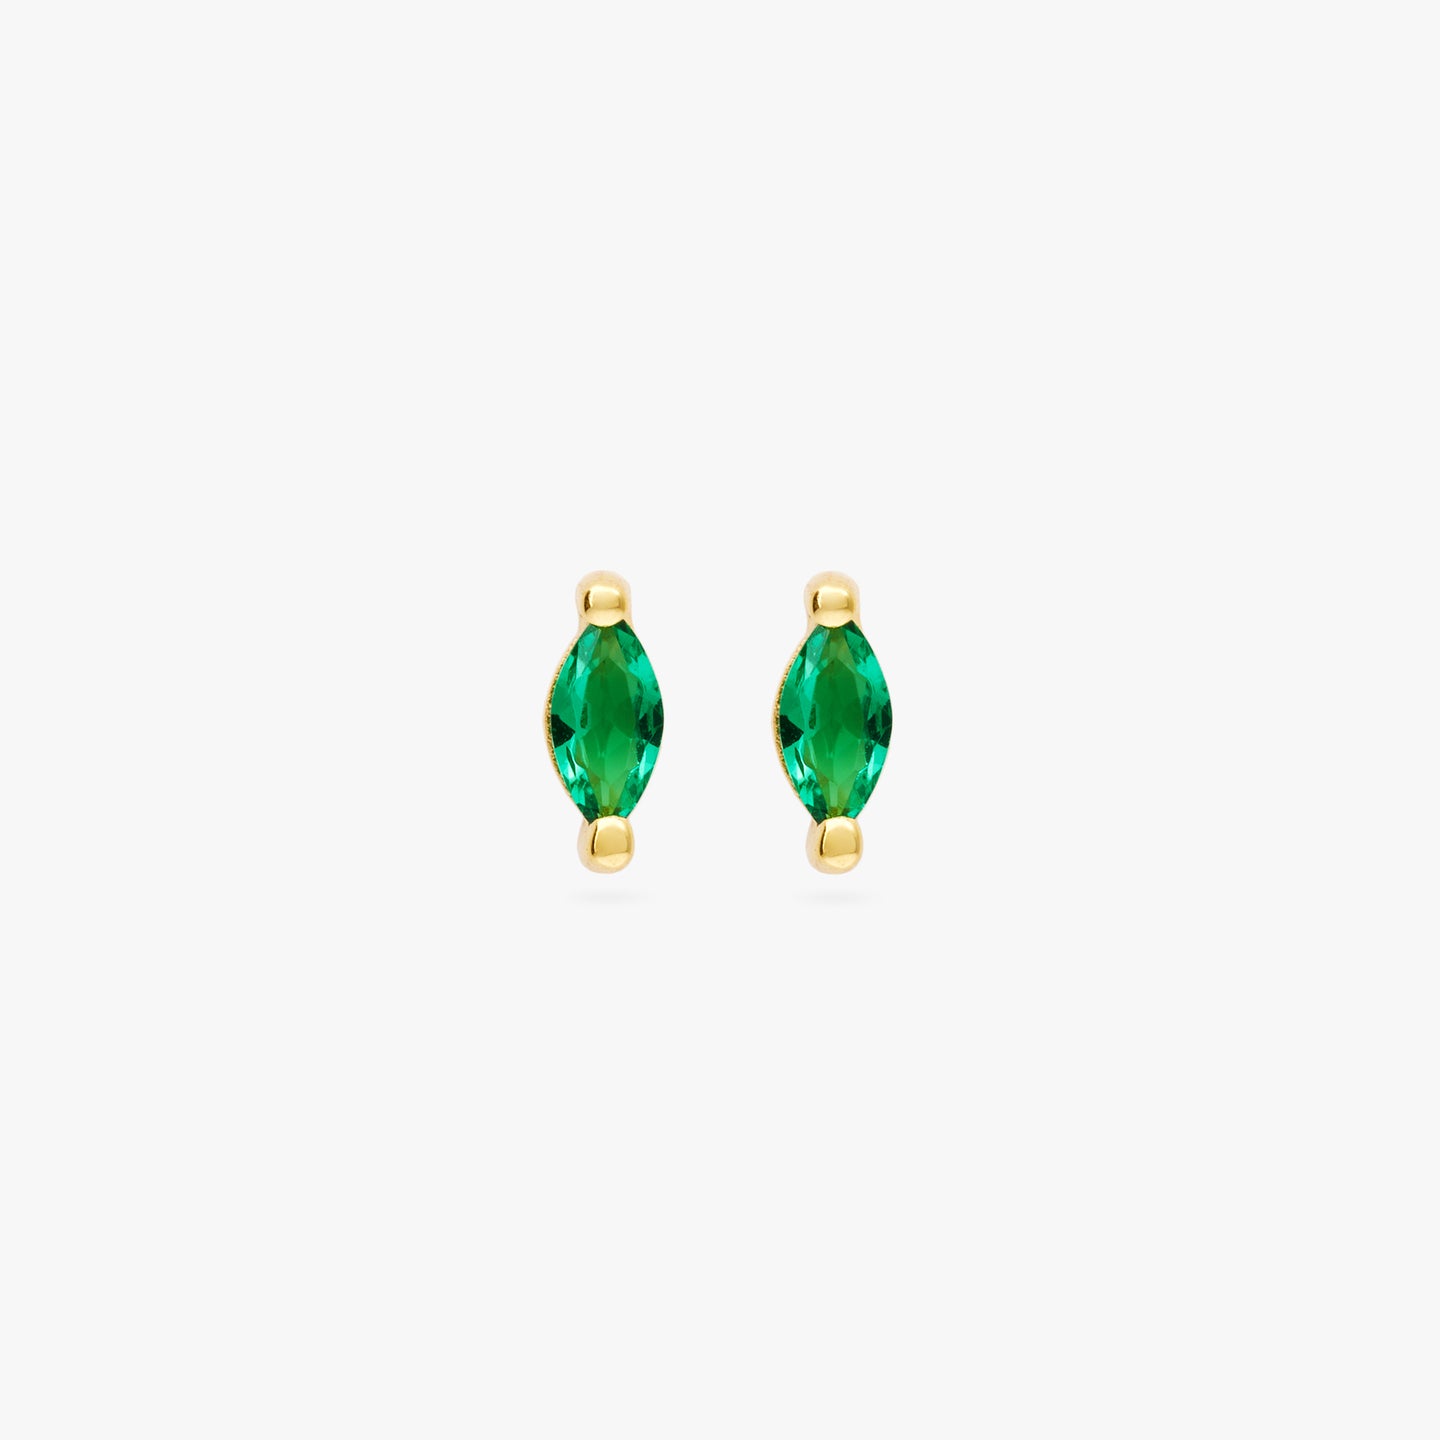 This is a pair of marquise mini studs that feature a green oblong shaped gem and has gold accents [pair] color:null|gold/green